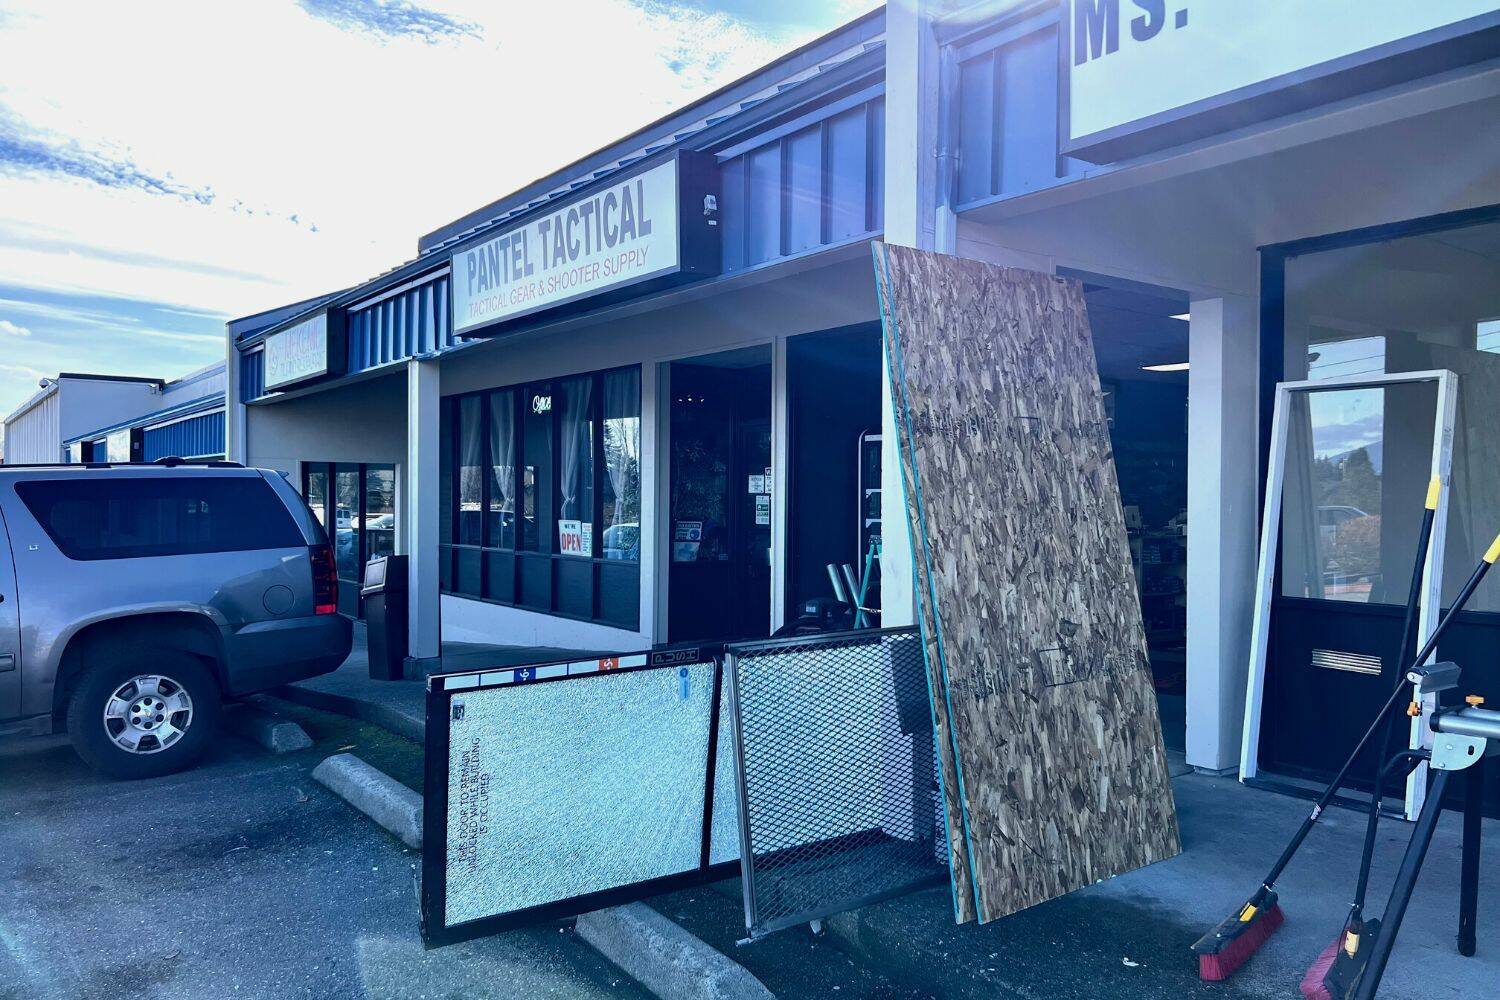 The glass doors smashed by burglars with a truck early in the morning of Feb. 15 are removed as employees clean up the scene. Cameron Sheppard / the Reporter